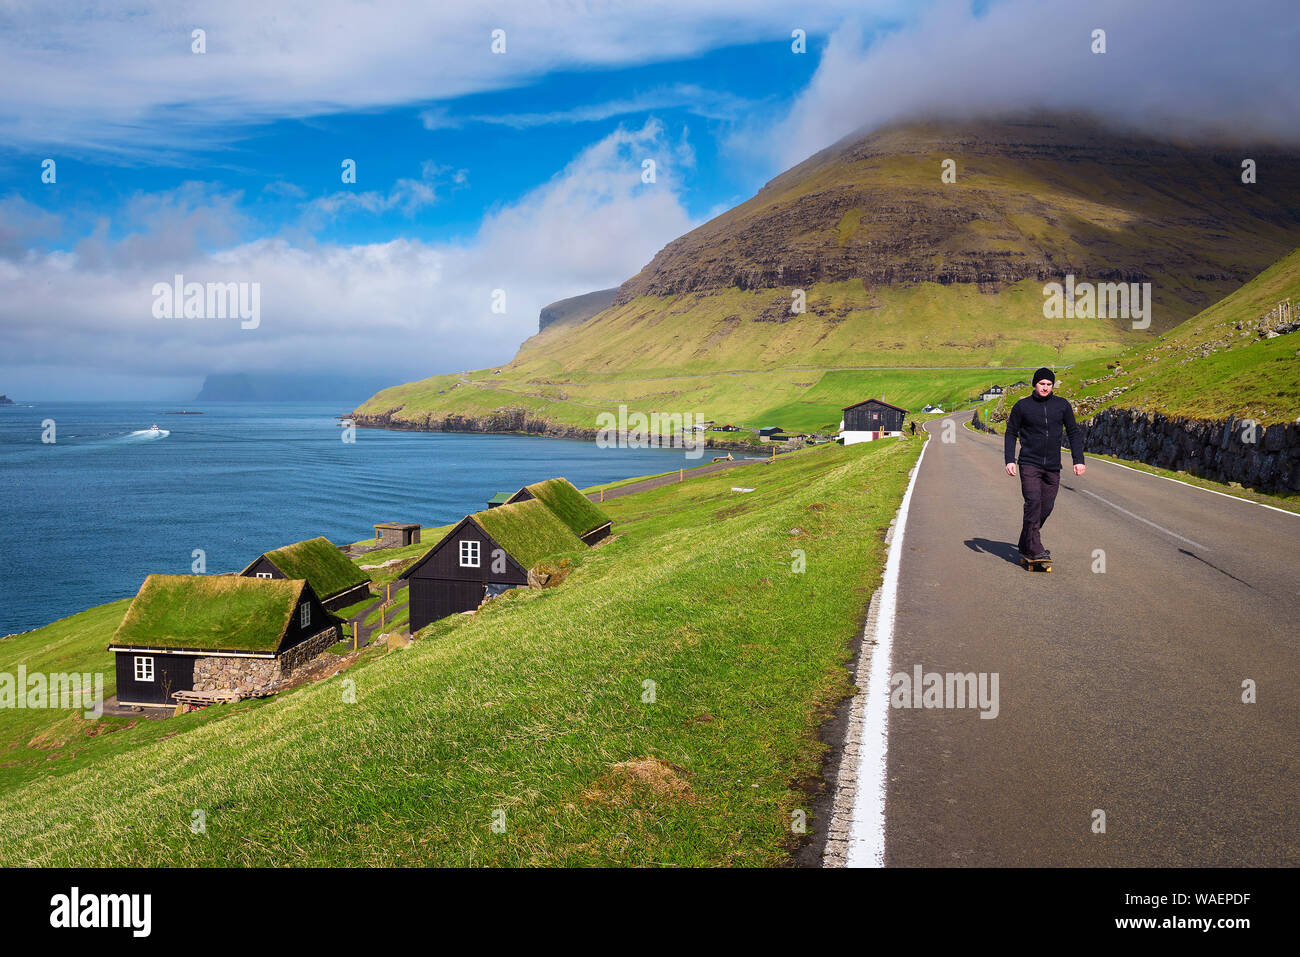 Skater riding a skateboard through the village of Bour on the Faroe Islands Stock Photo